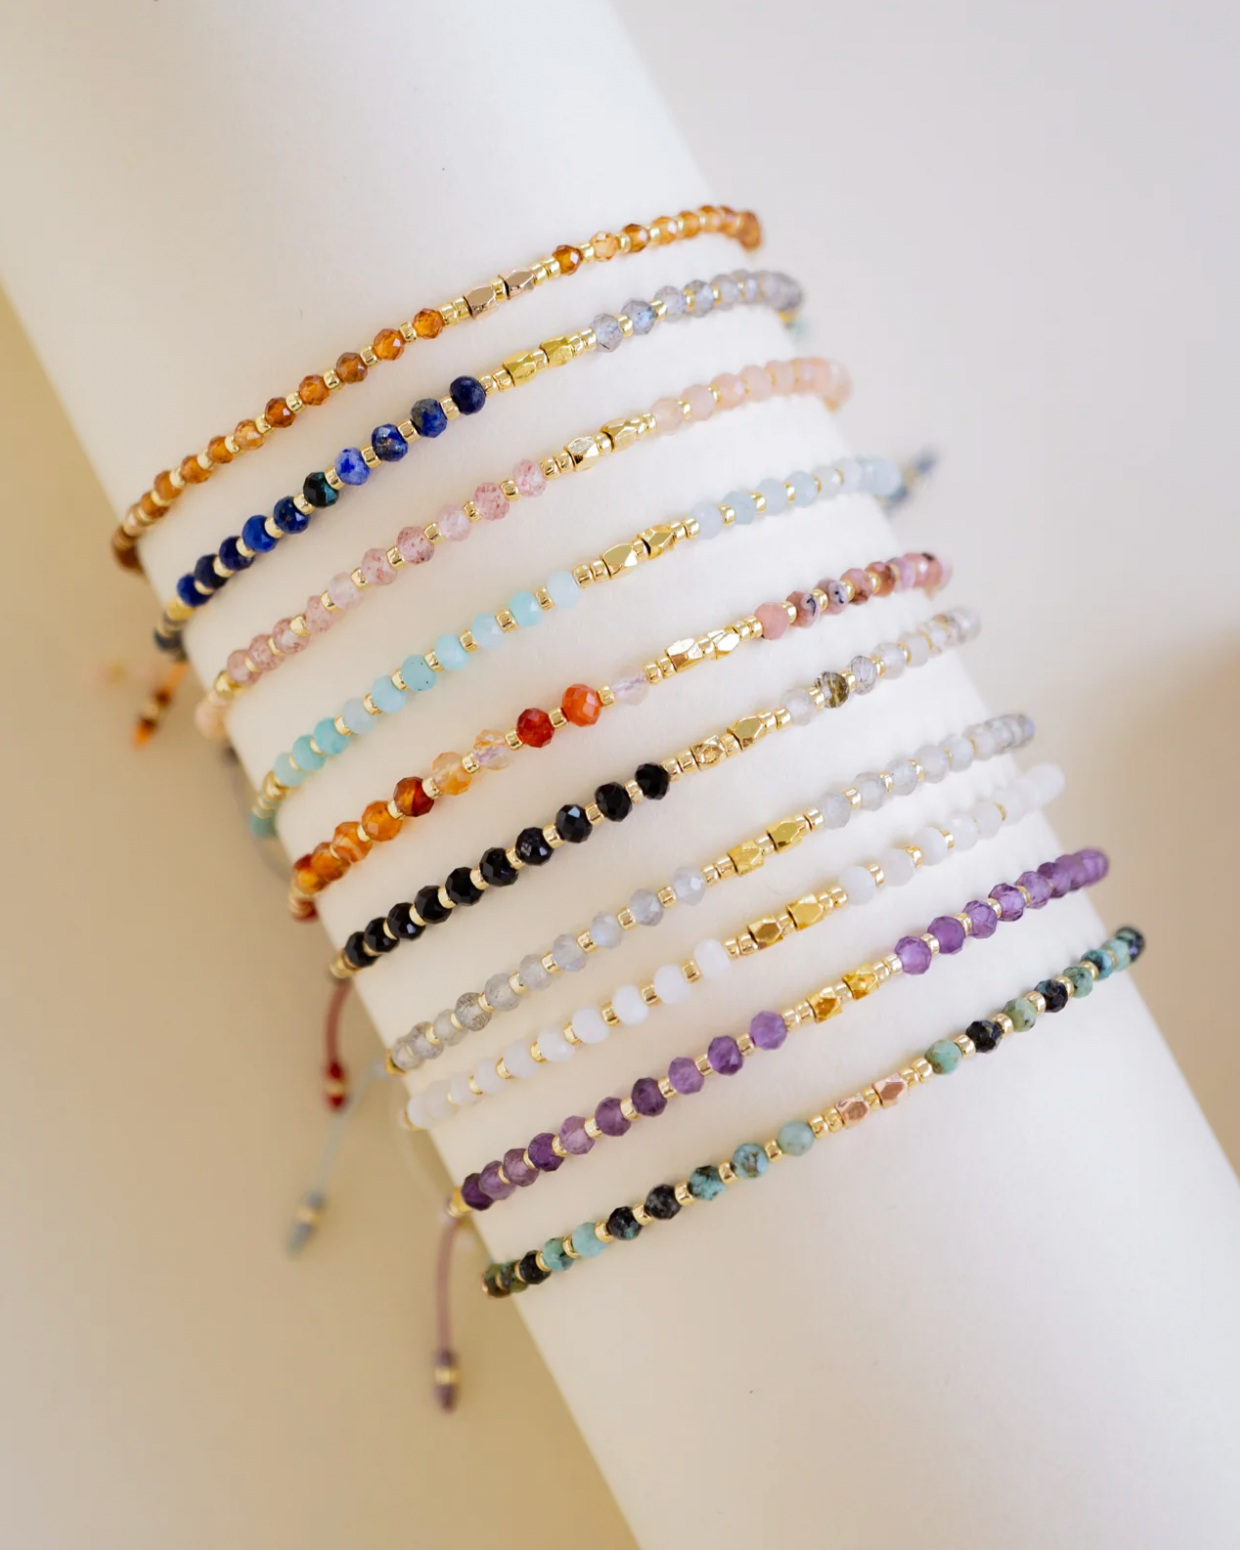 Healing Stacking Bracelet by Kindred Row